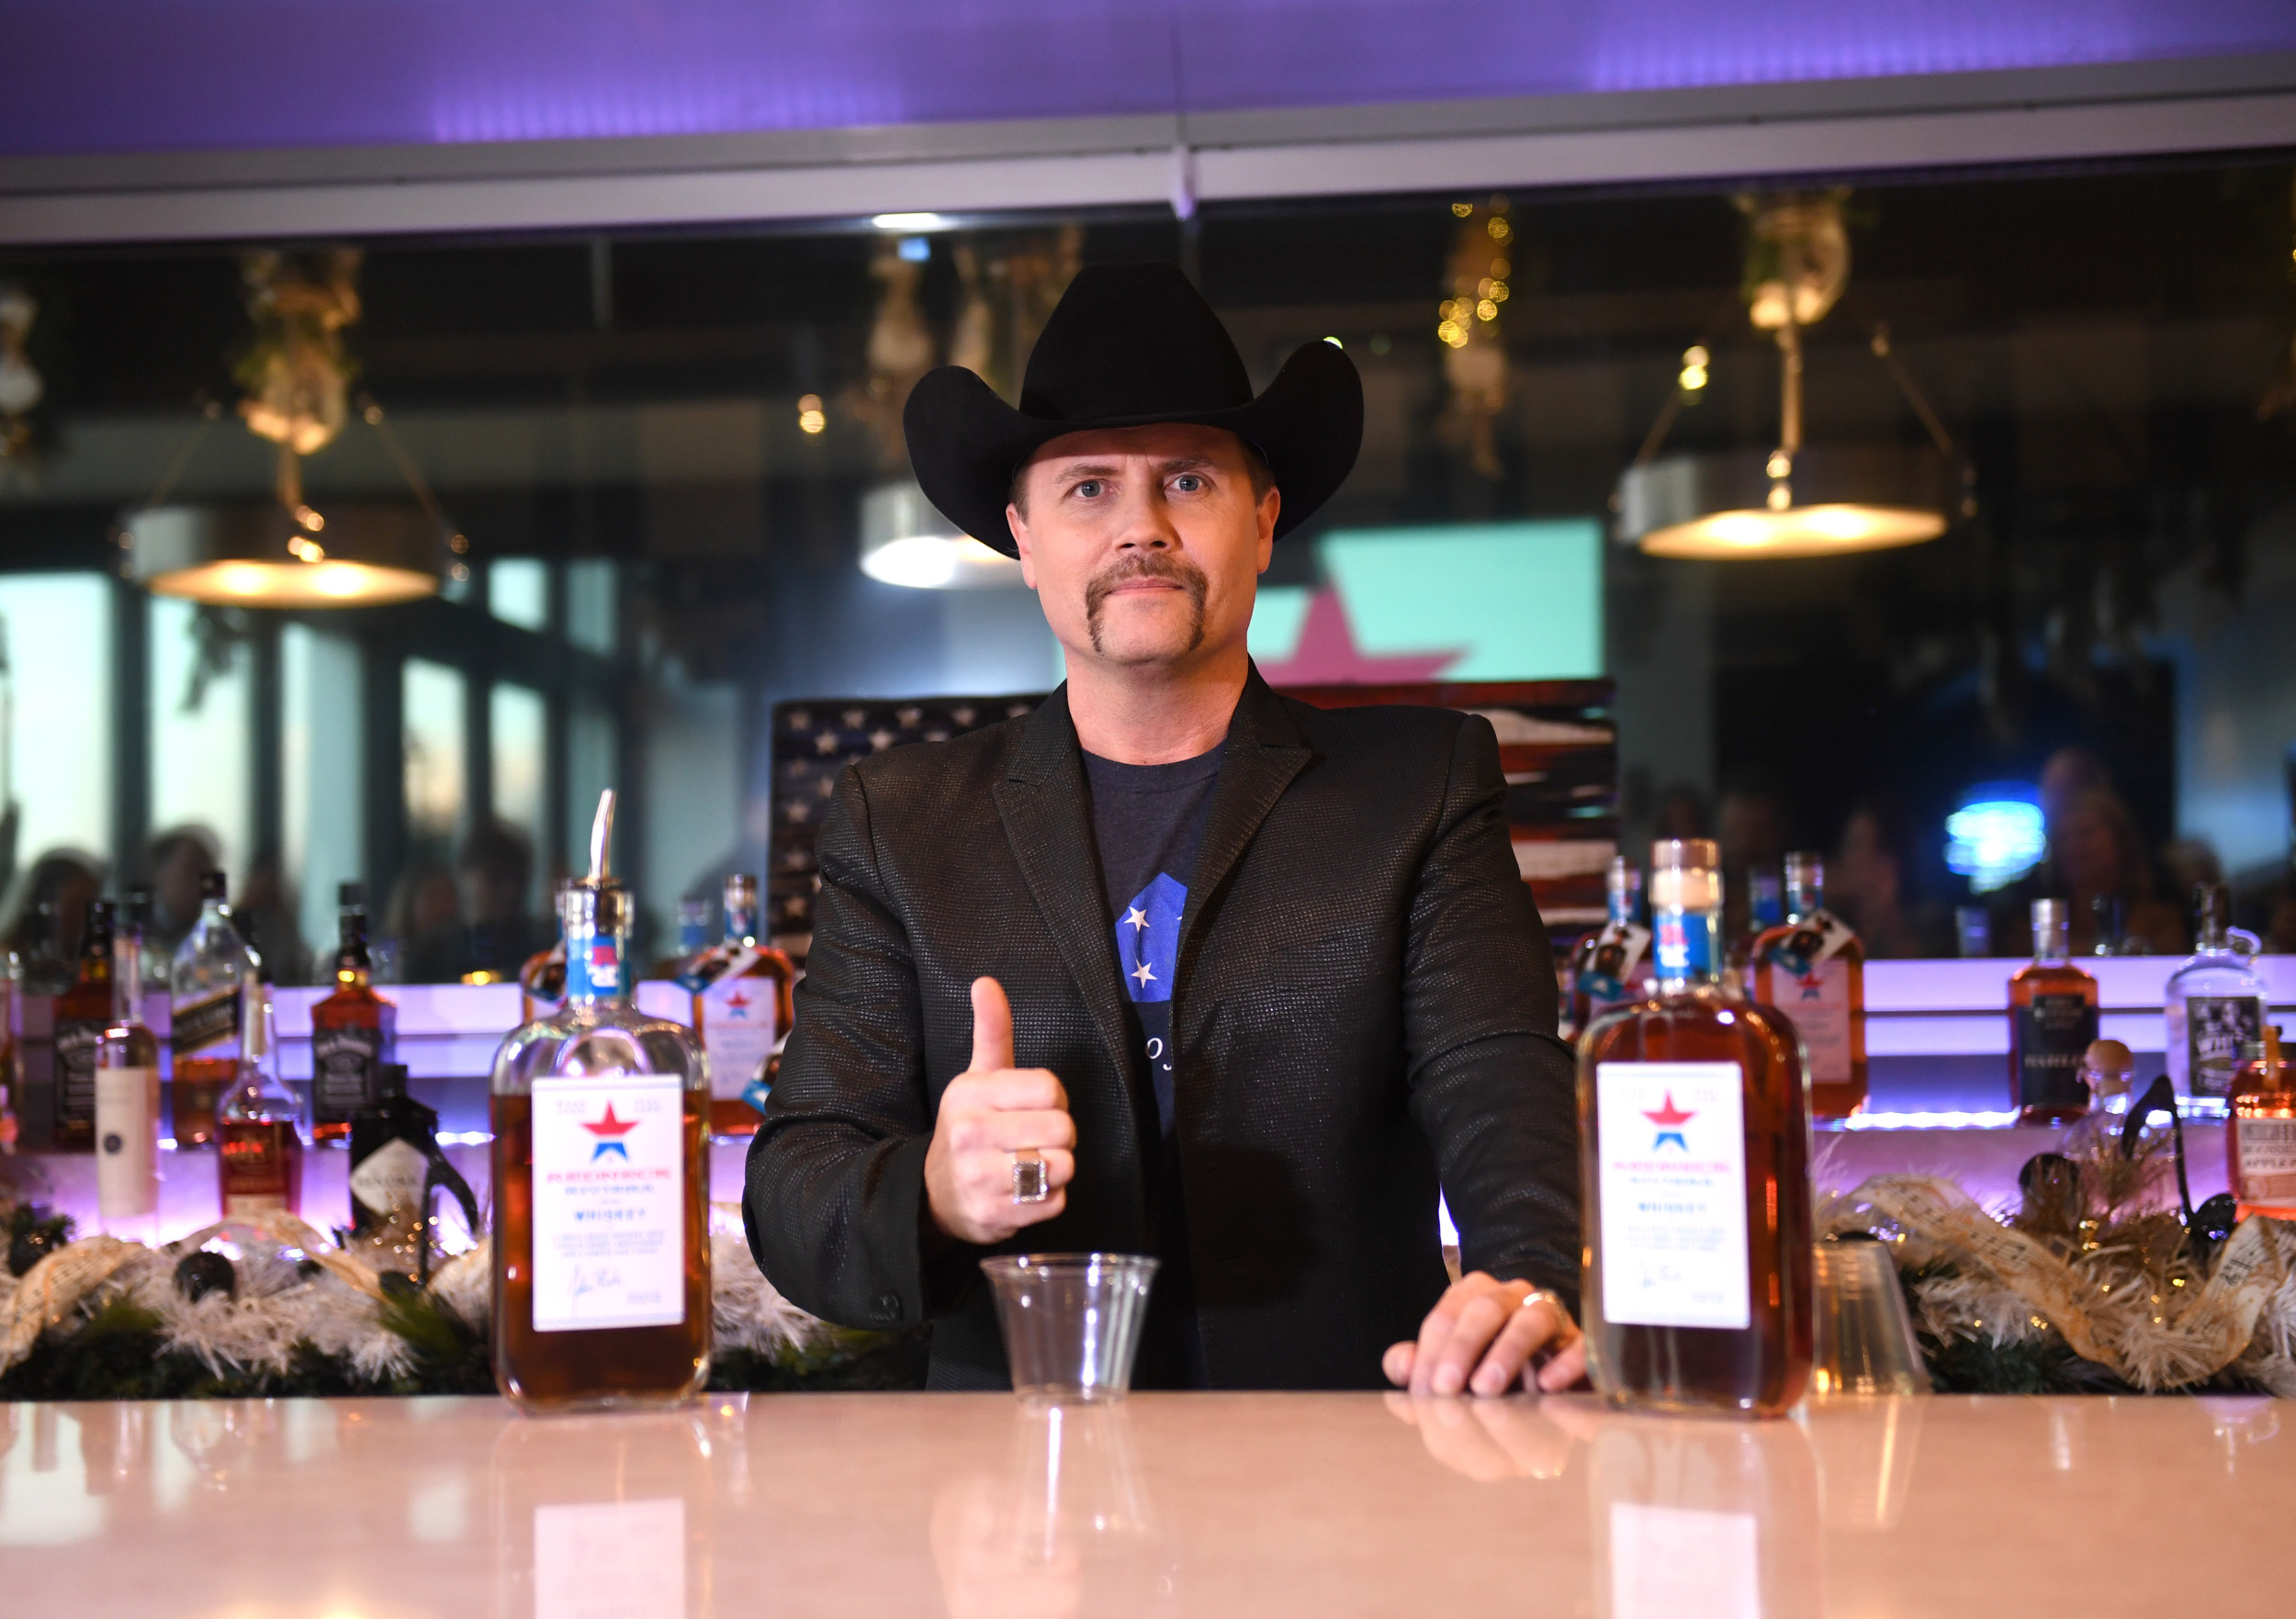 john rich sparks debate over vaccines and autism